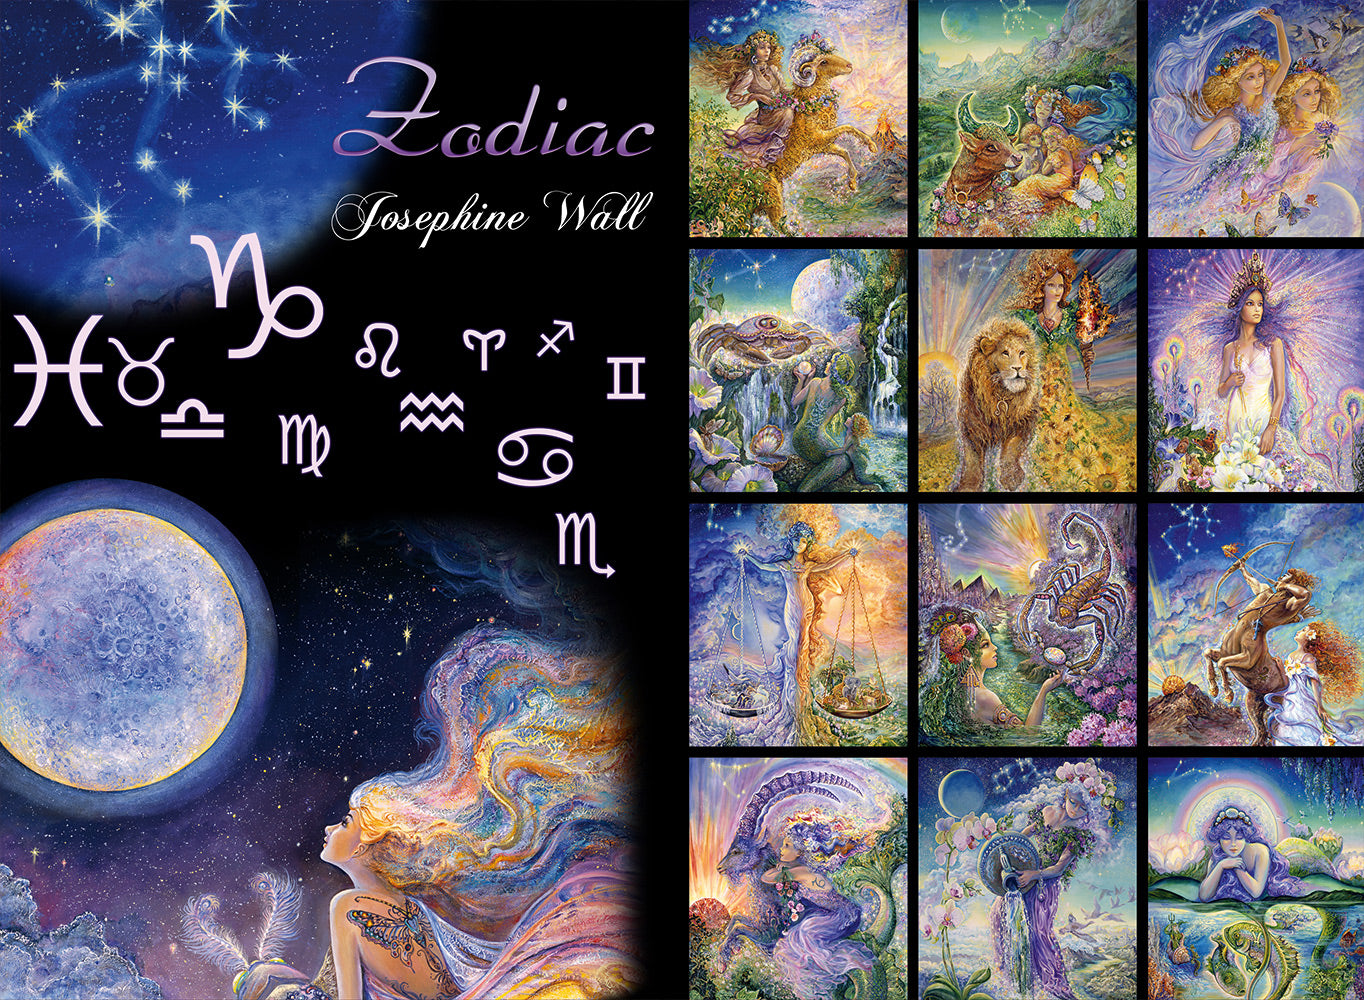 Signs of the Zodiac by Josephine Wall, 3000 Piece Puzzle